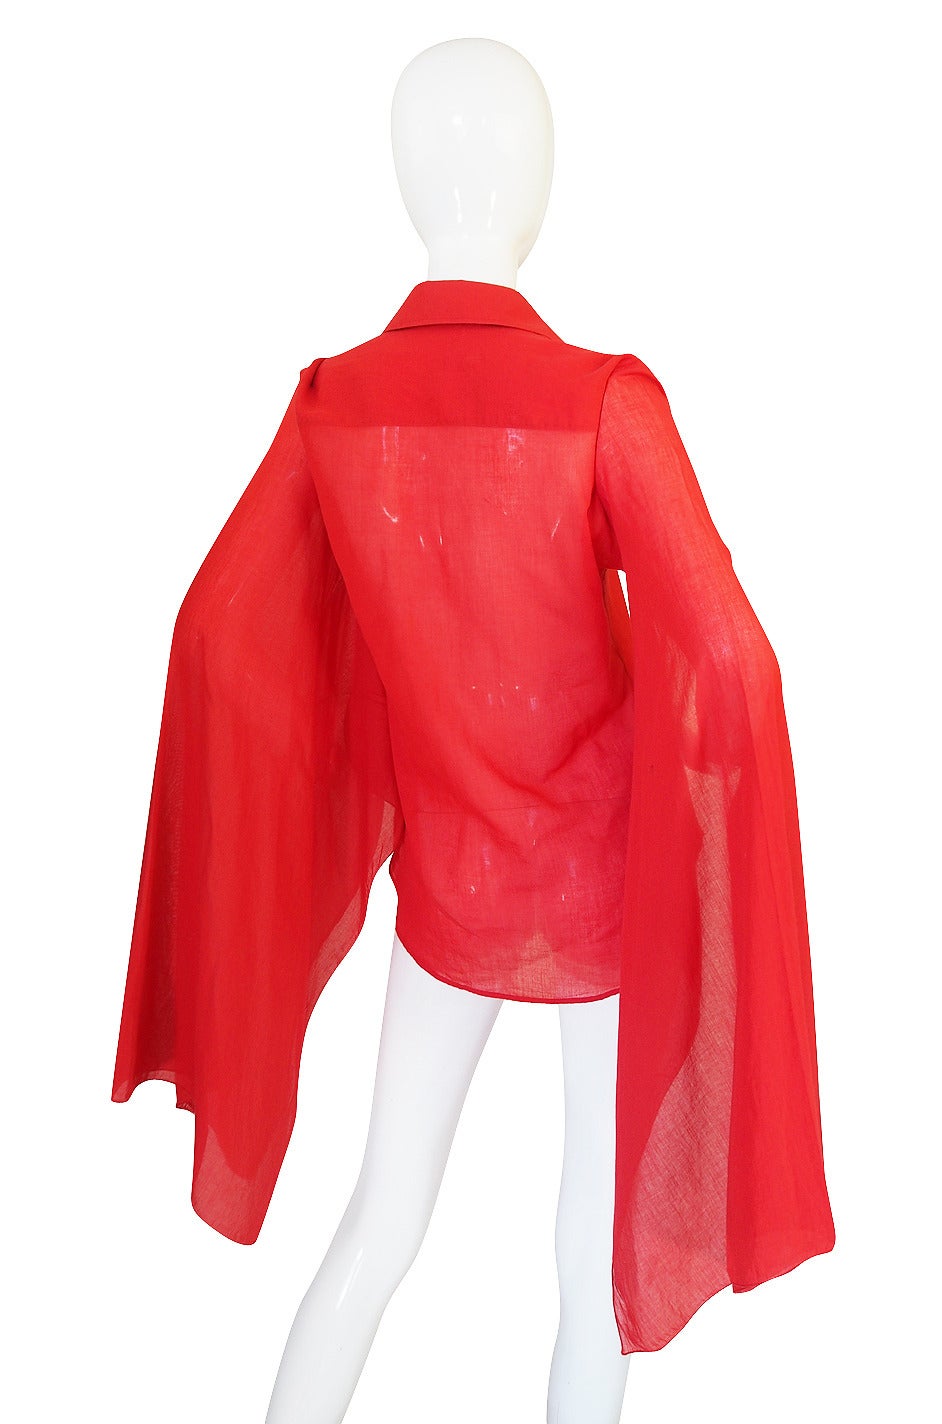 From the heady days of Tom Ford at Gucci comes this gorgeous little red, light weight, very fine cotton top with the most amazing sleeves. Through the torso it is cut like a typical button down with a pointed collar and Gucci engraved red buttons